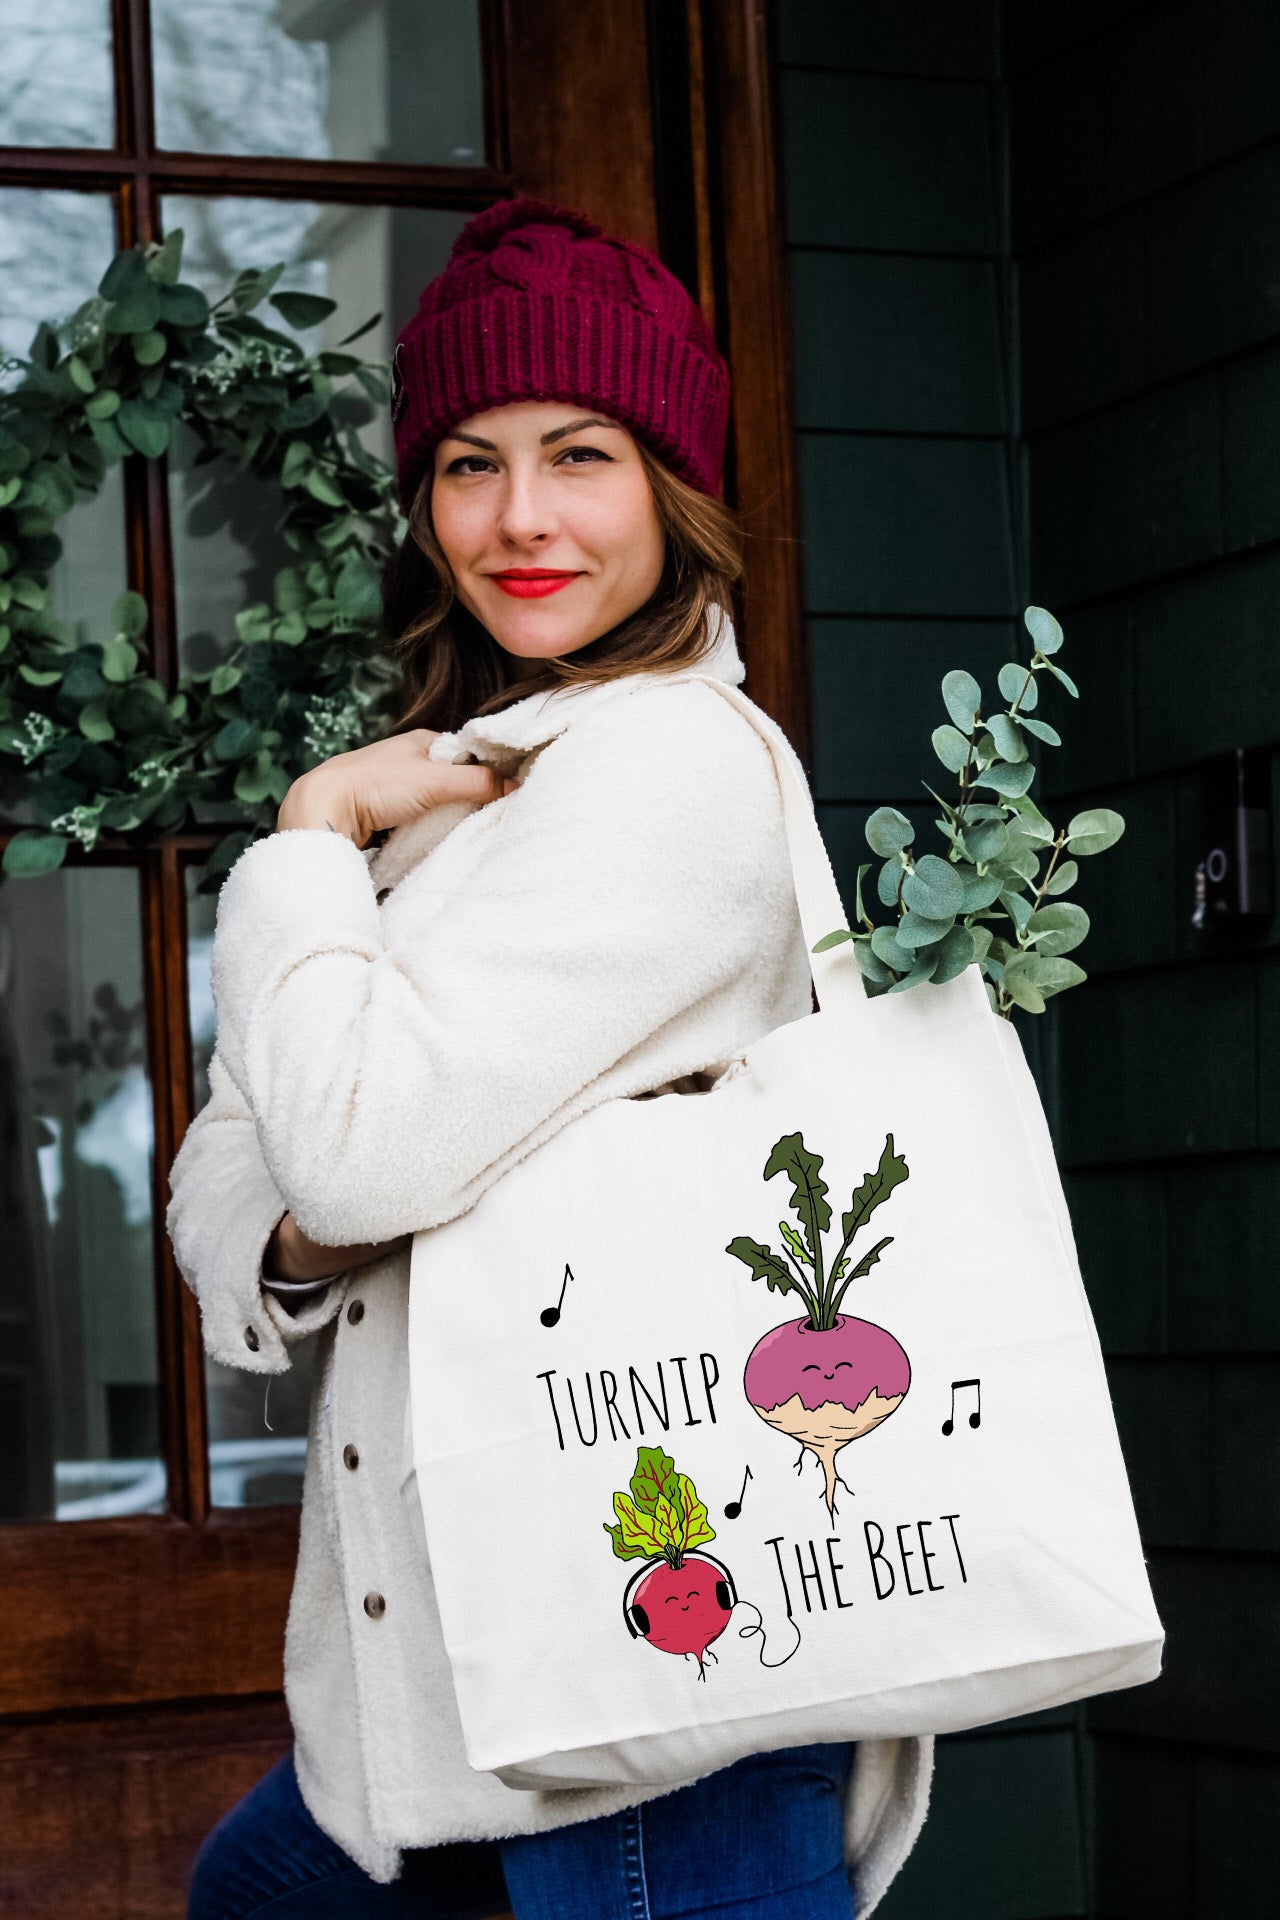 a woman carrying a bag that says turnip the beet